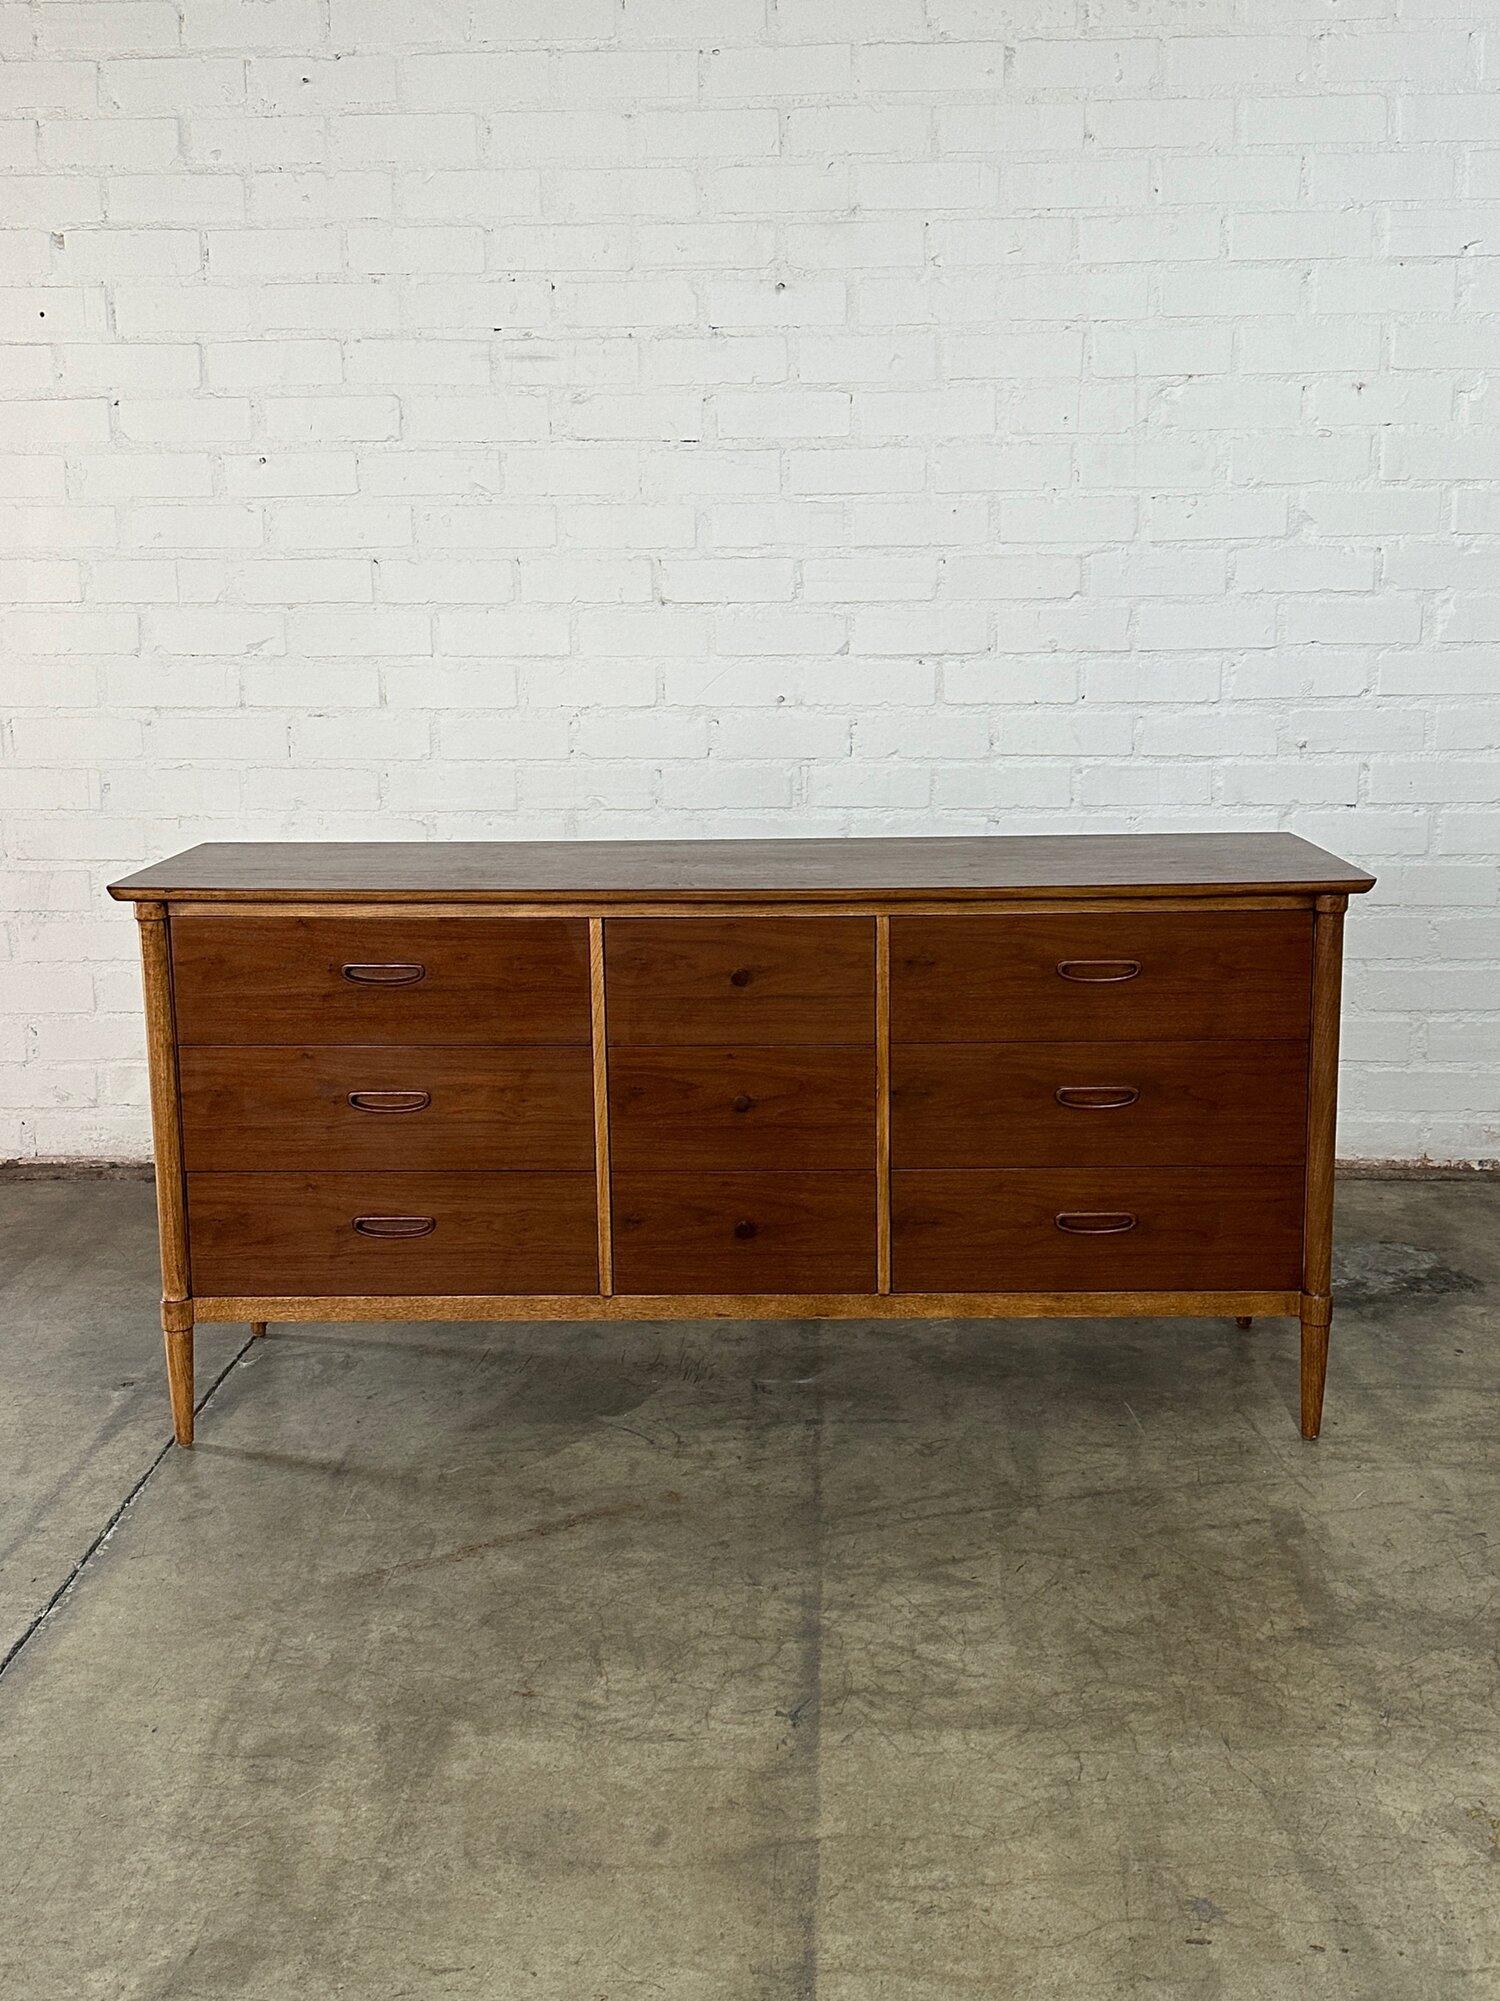 W66 D18 H31.75

Mid century dresser by Lane in fully restored condition. Item features sculptured handles and  two different wood types. Dresser is structurally sound and fully functional. 